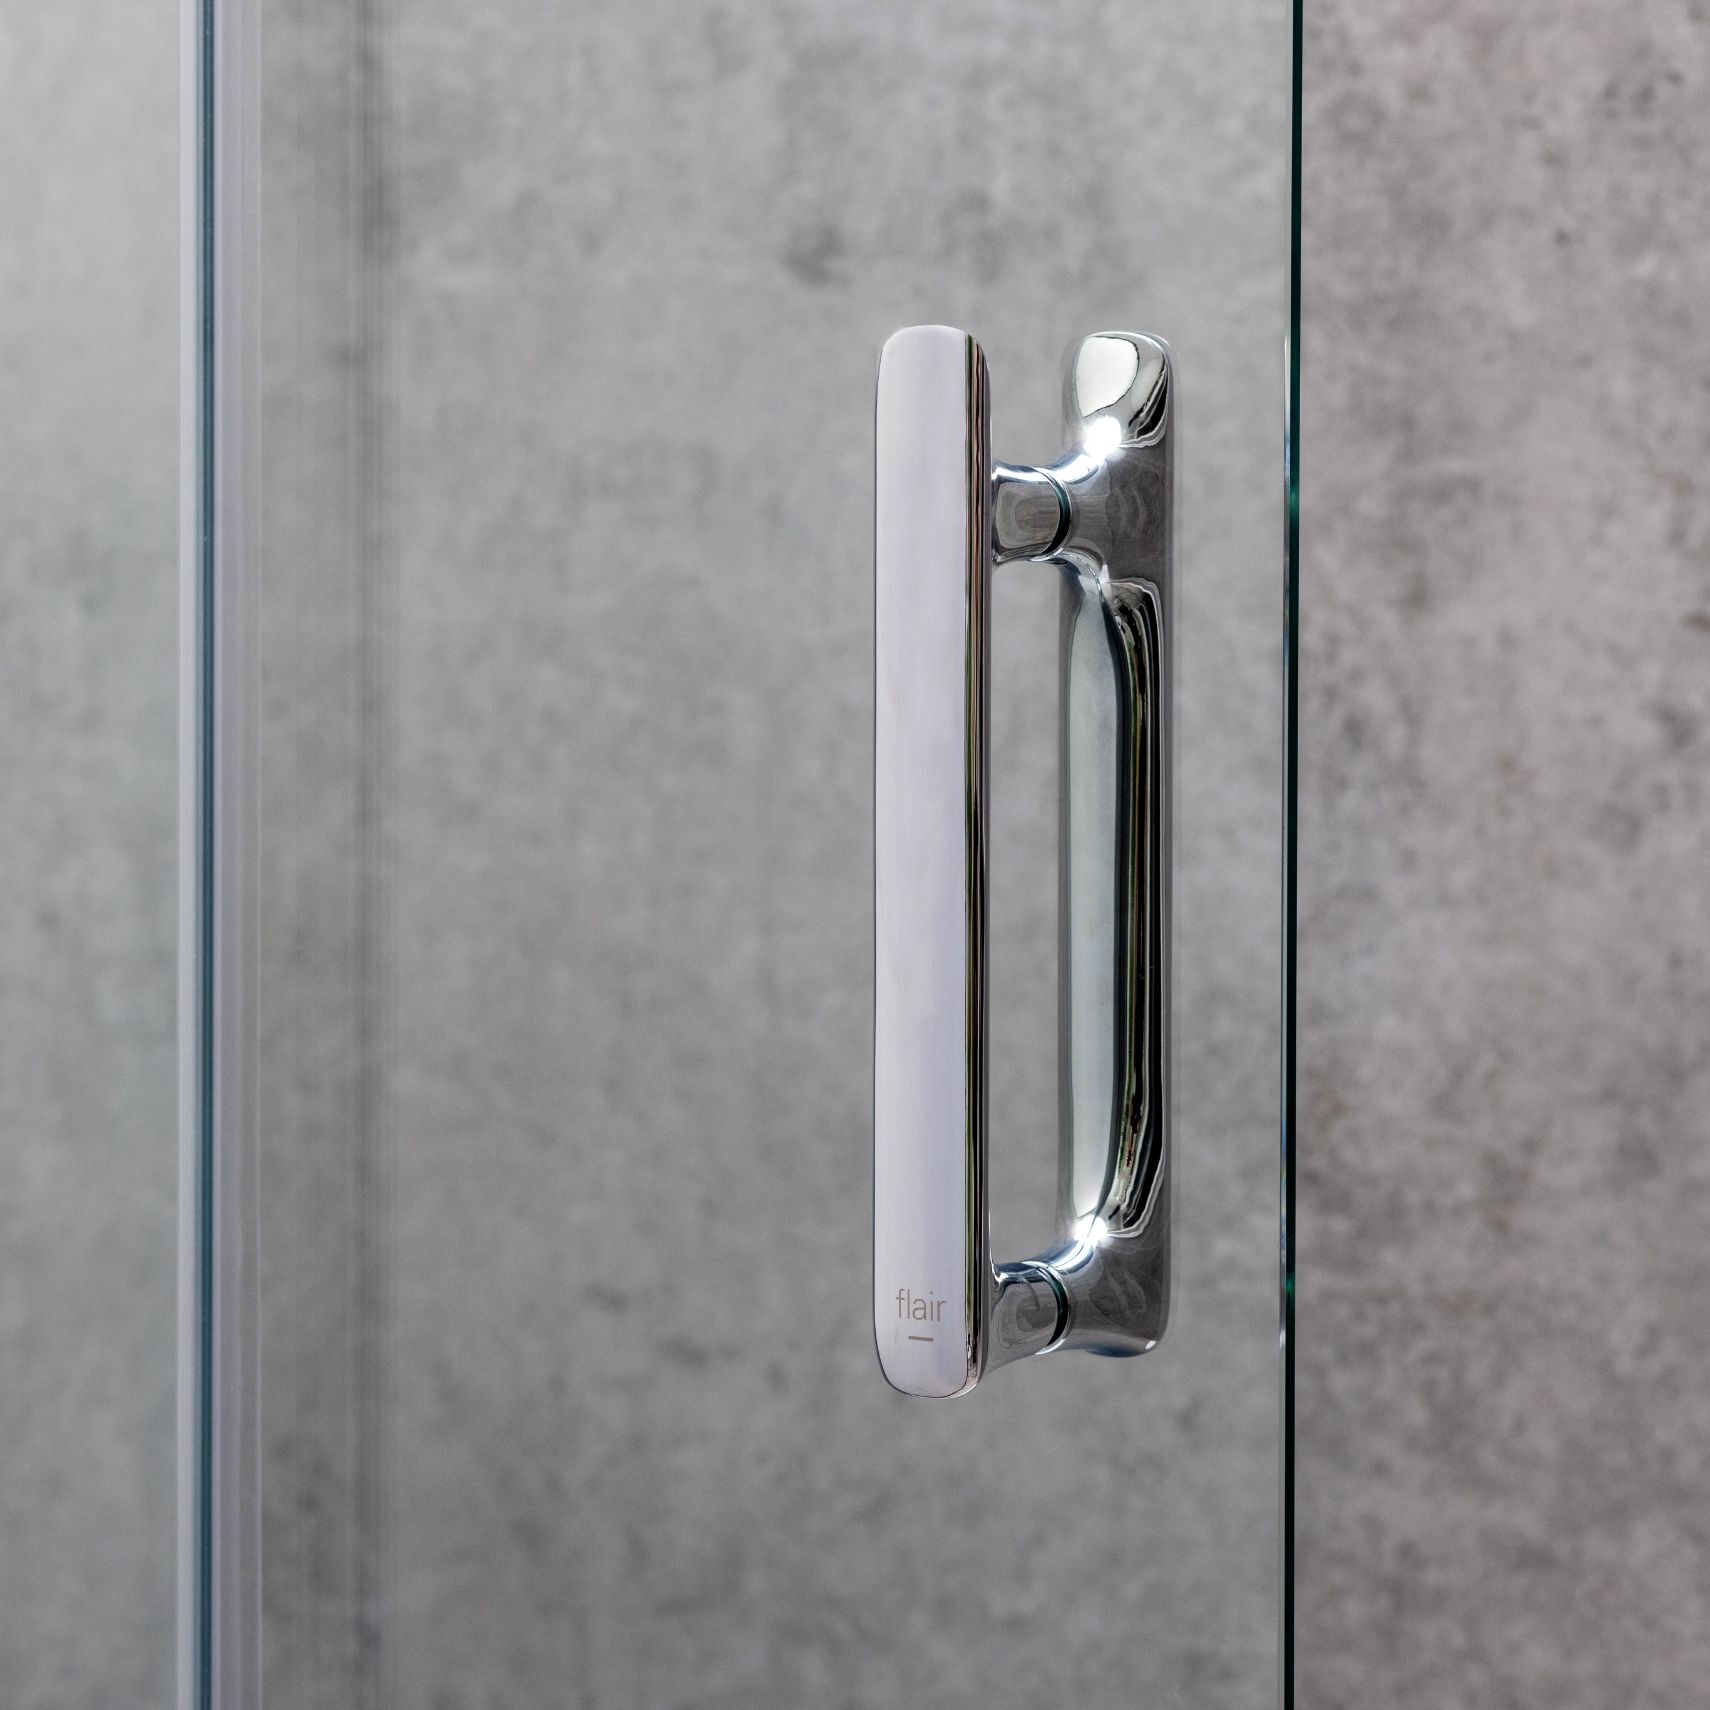 Chrome plated handle - uniquely crafted with integrated robe hook.